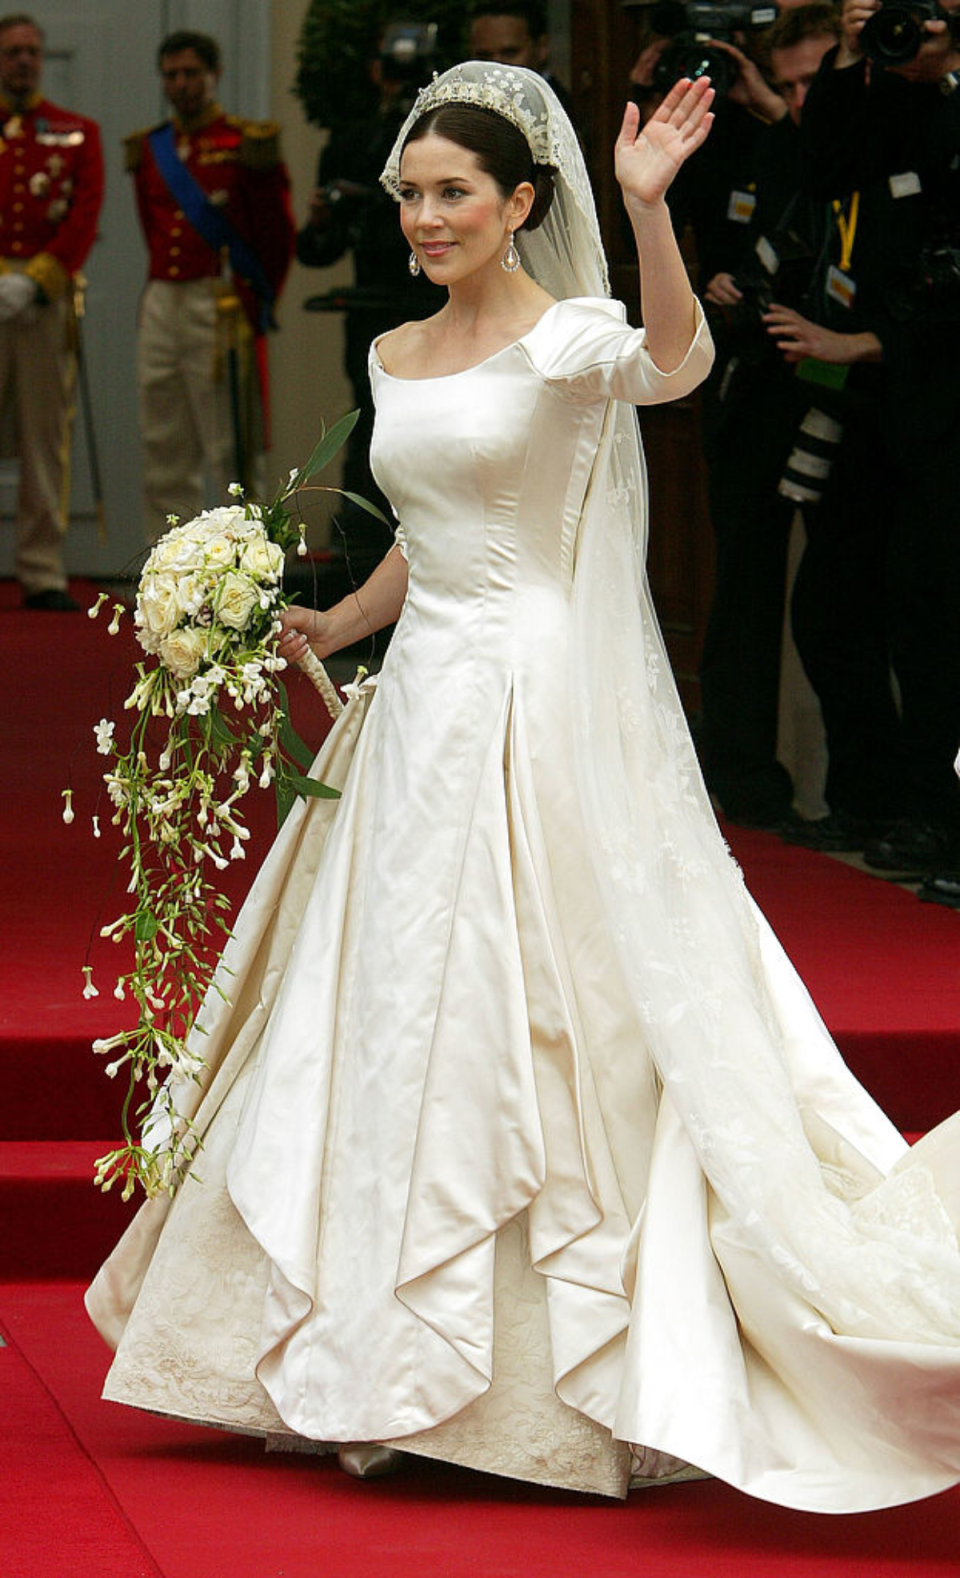 Princess Mary in her wedding dress